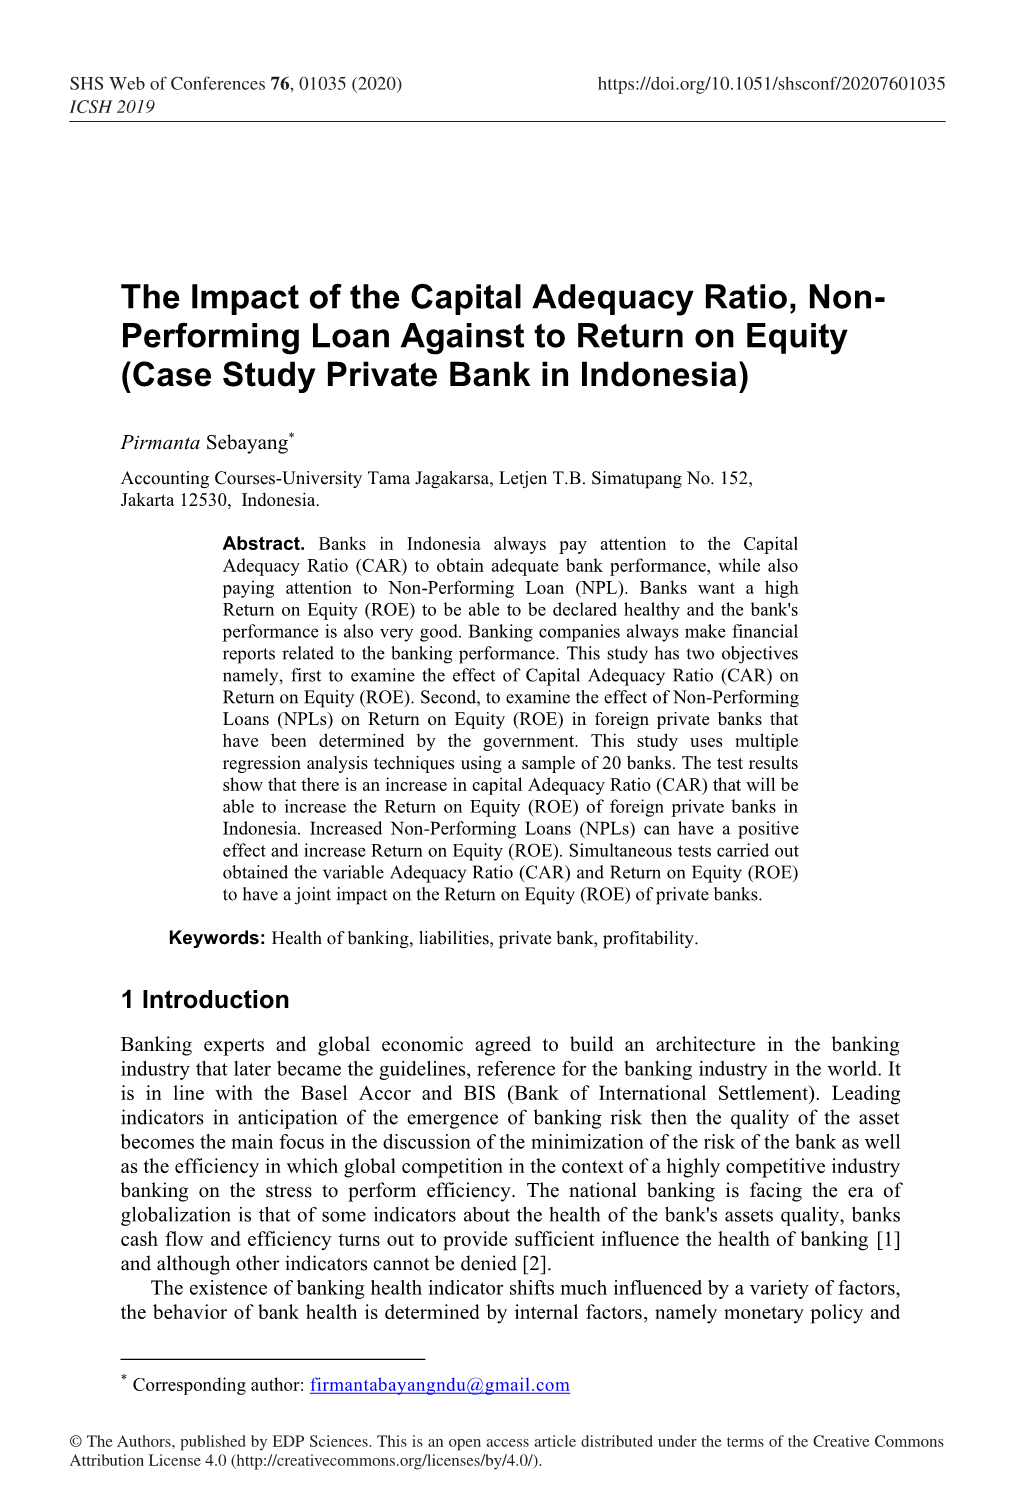 The Impact of the Capital Adequacy Ratio, Non-Performing Loan